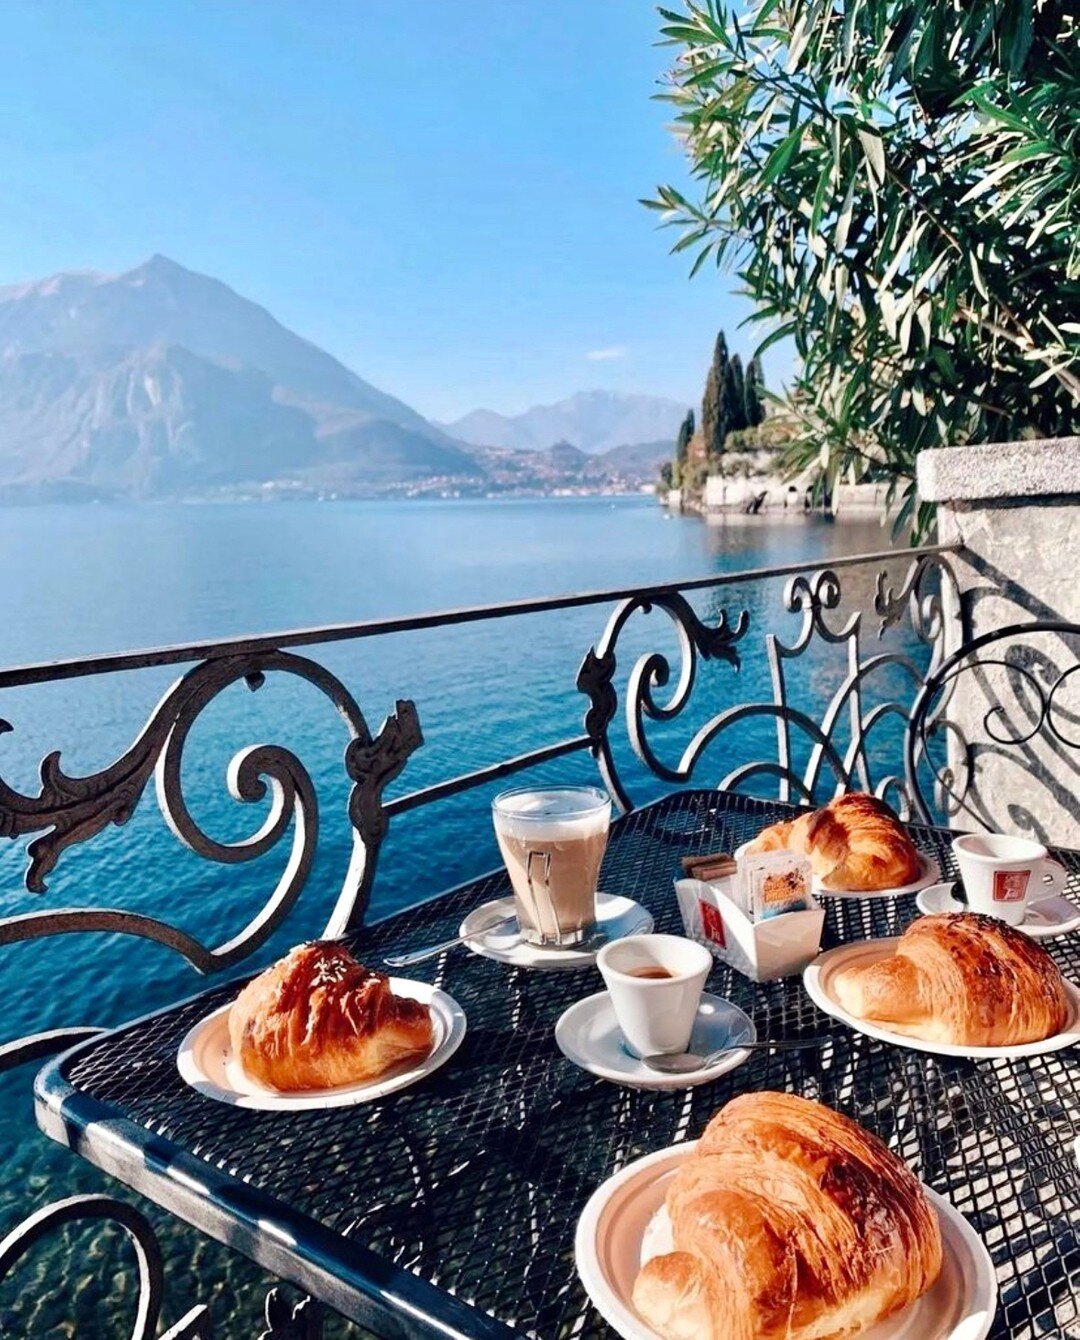 Lake Como weekend vibes ✨ ​​​​​​​​
​​​​​​​​
How do you like to start your weekend? 🥐

.
.
.
.

#croissant #lakecomo #lakecomoitaly #lakecomolife #weeekendvibes #saturday #coffee #coffeetime #coffeelover #croissantlover #lagodicomo #lakecomowellness 